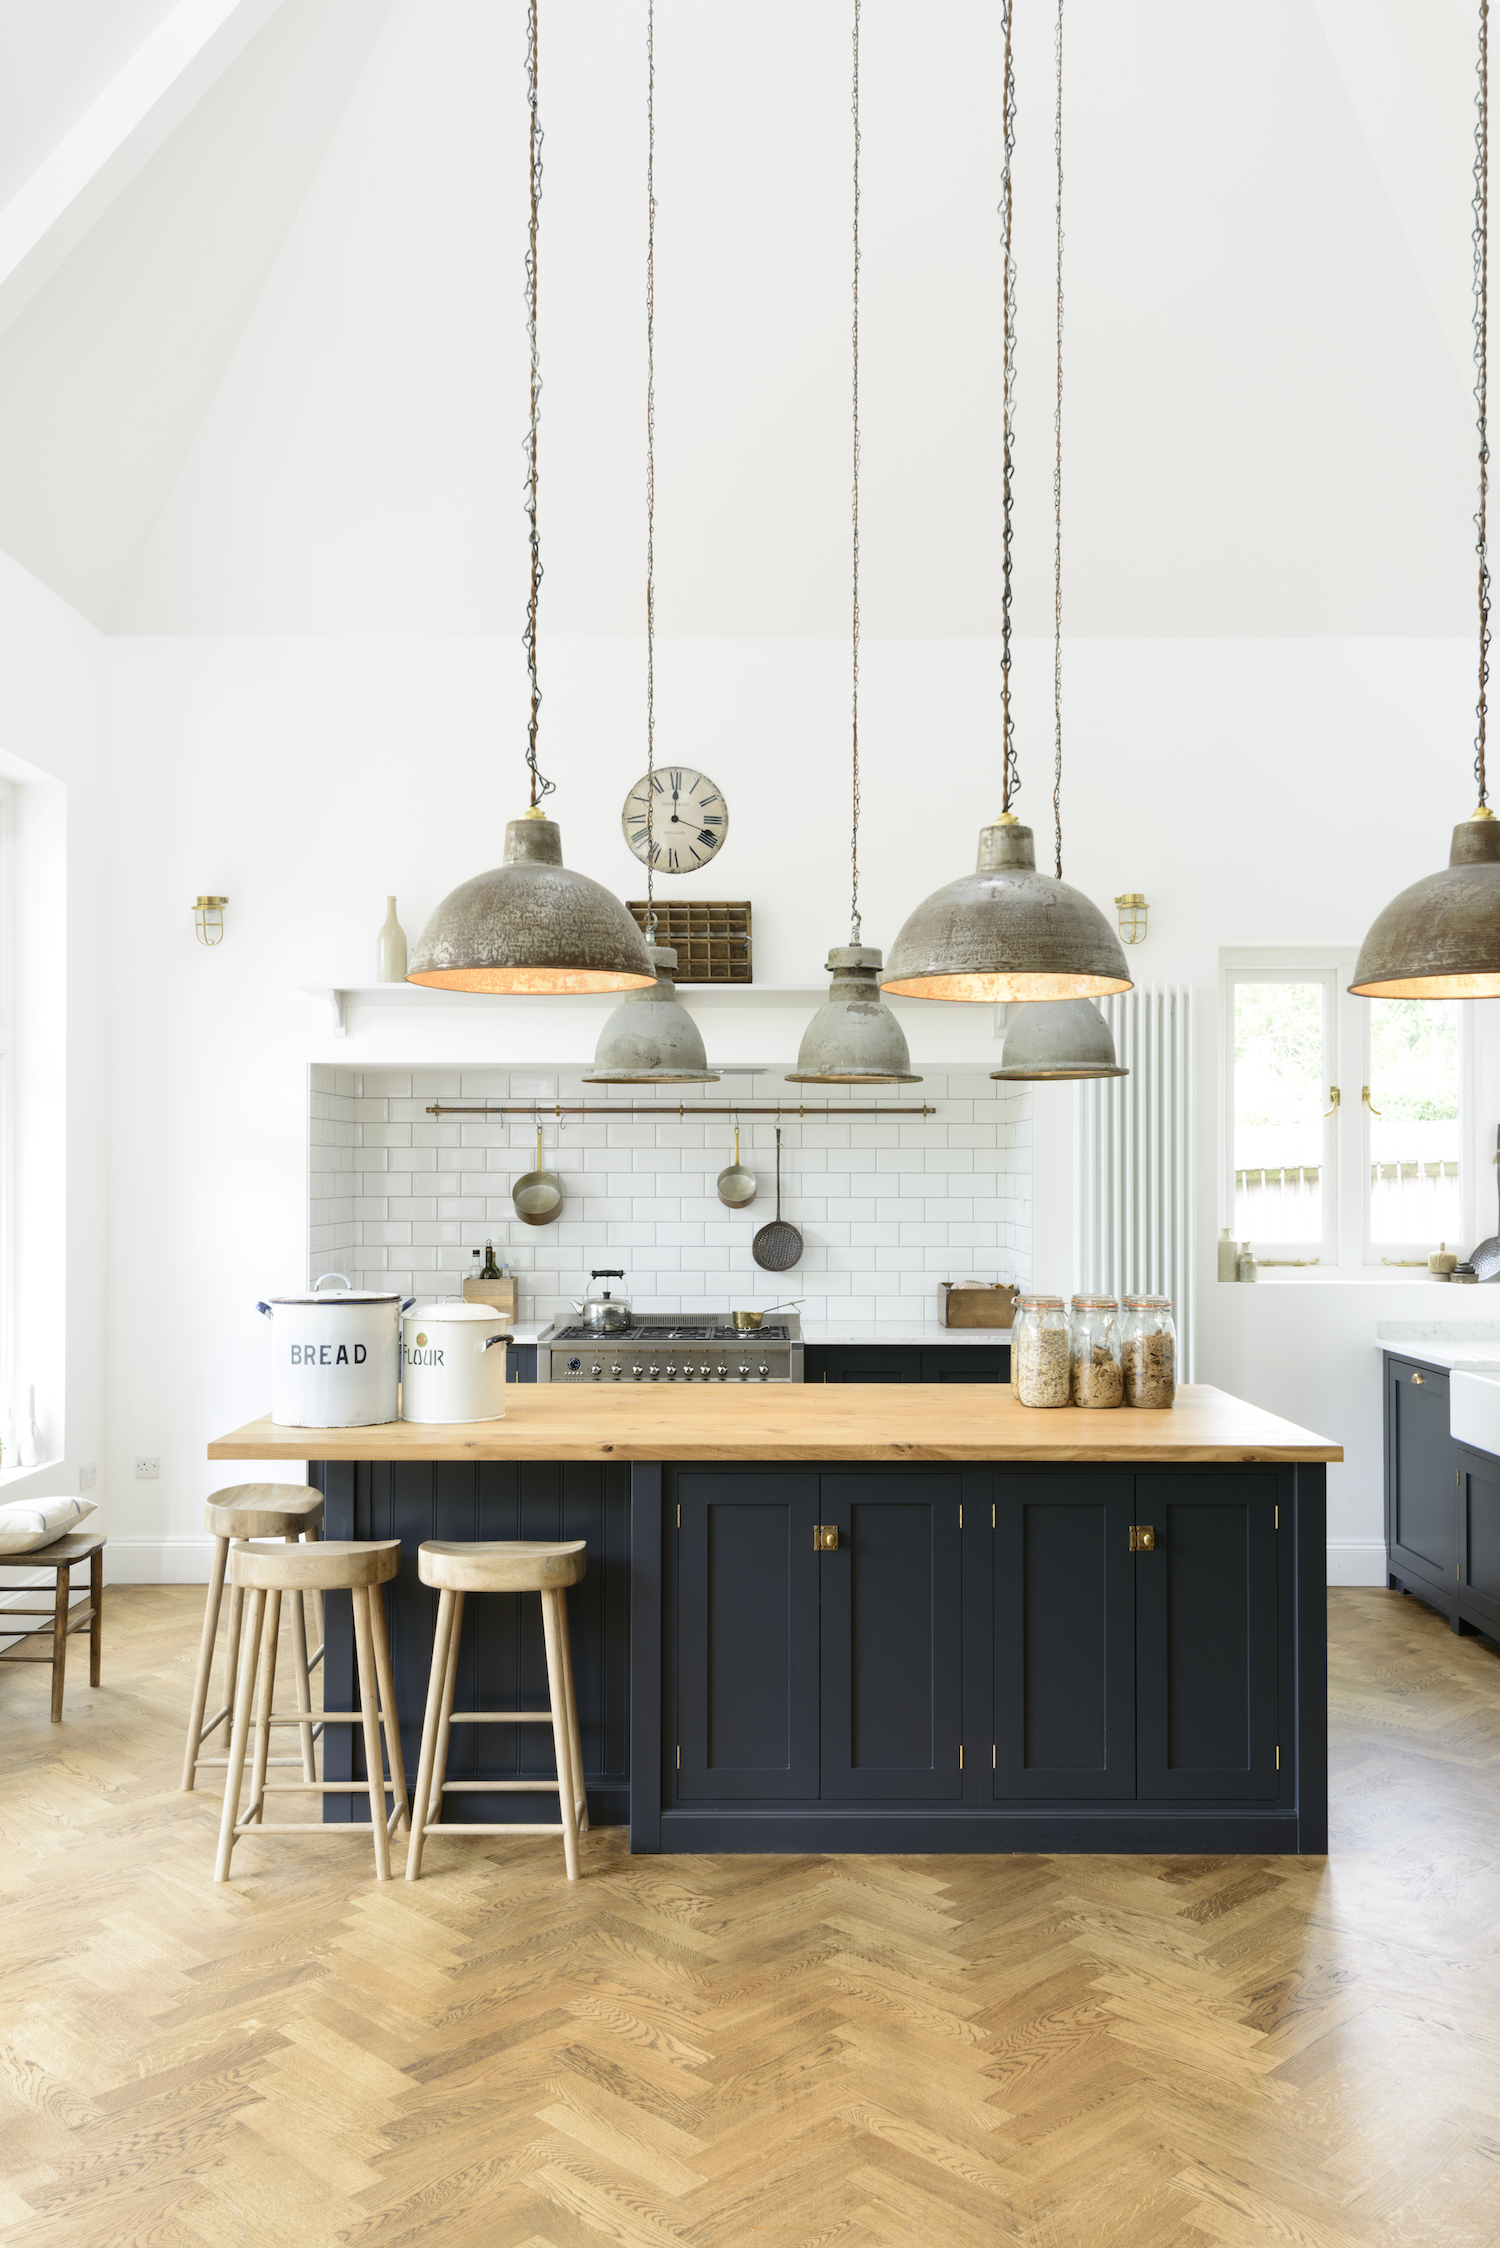 How to design and install a kitchen island   experts share their ...